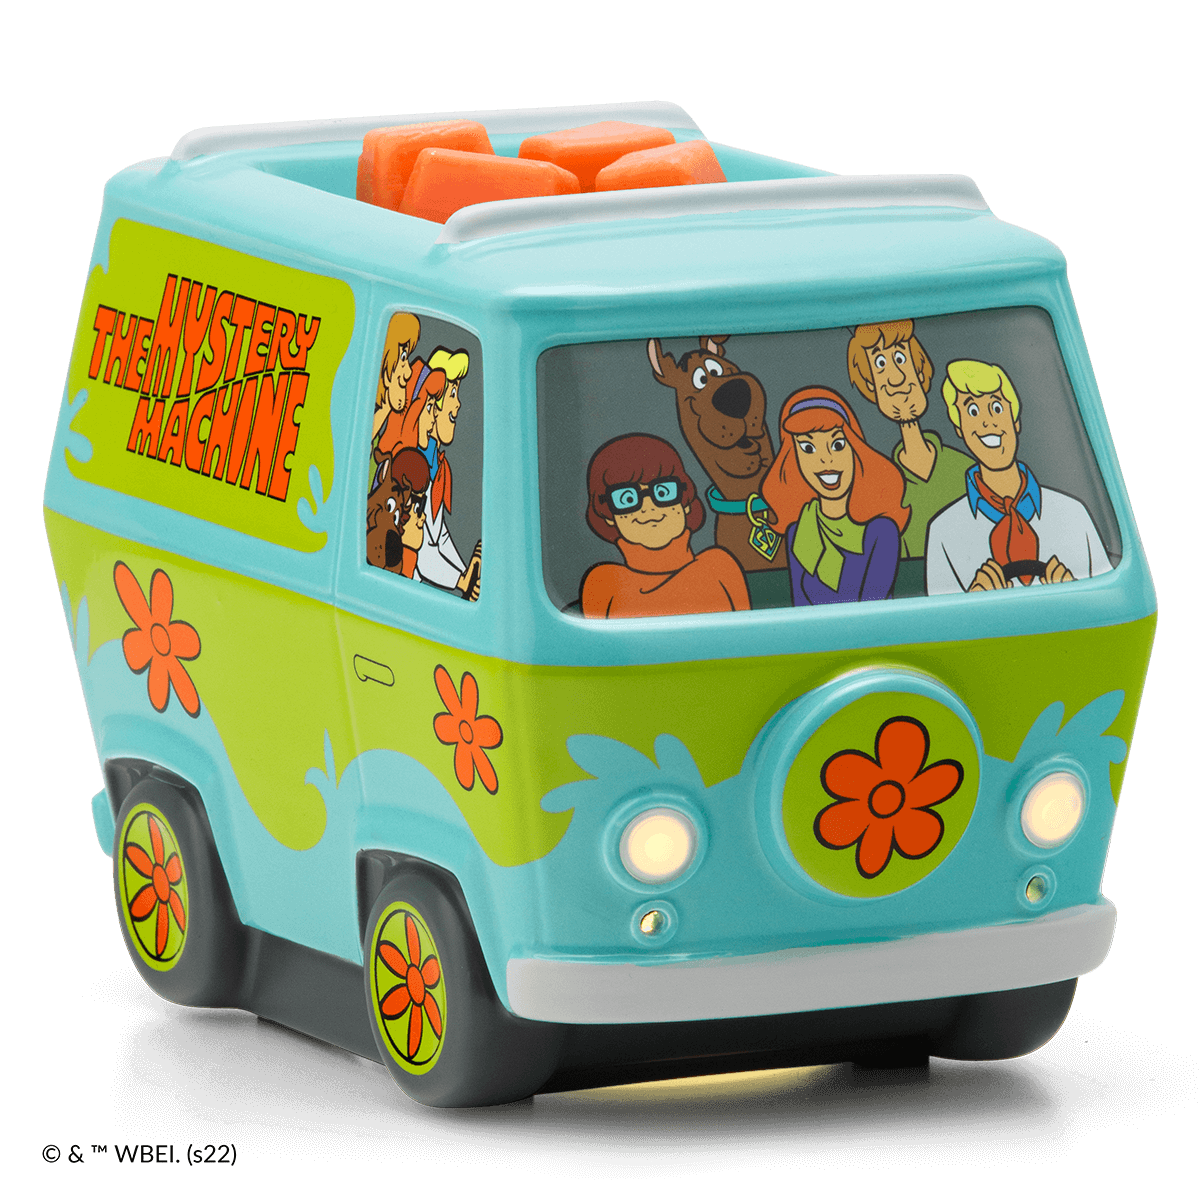 Mystery Machine Scentsy Warmer - Scooby Doo Van - The Safest Candles